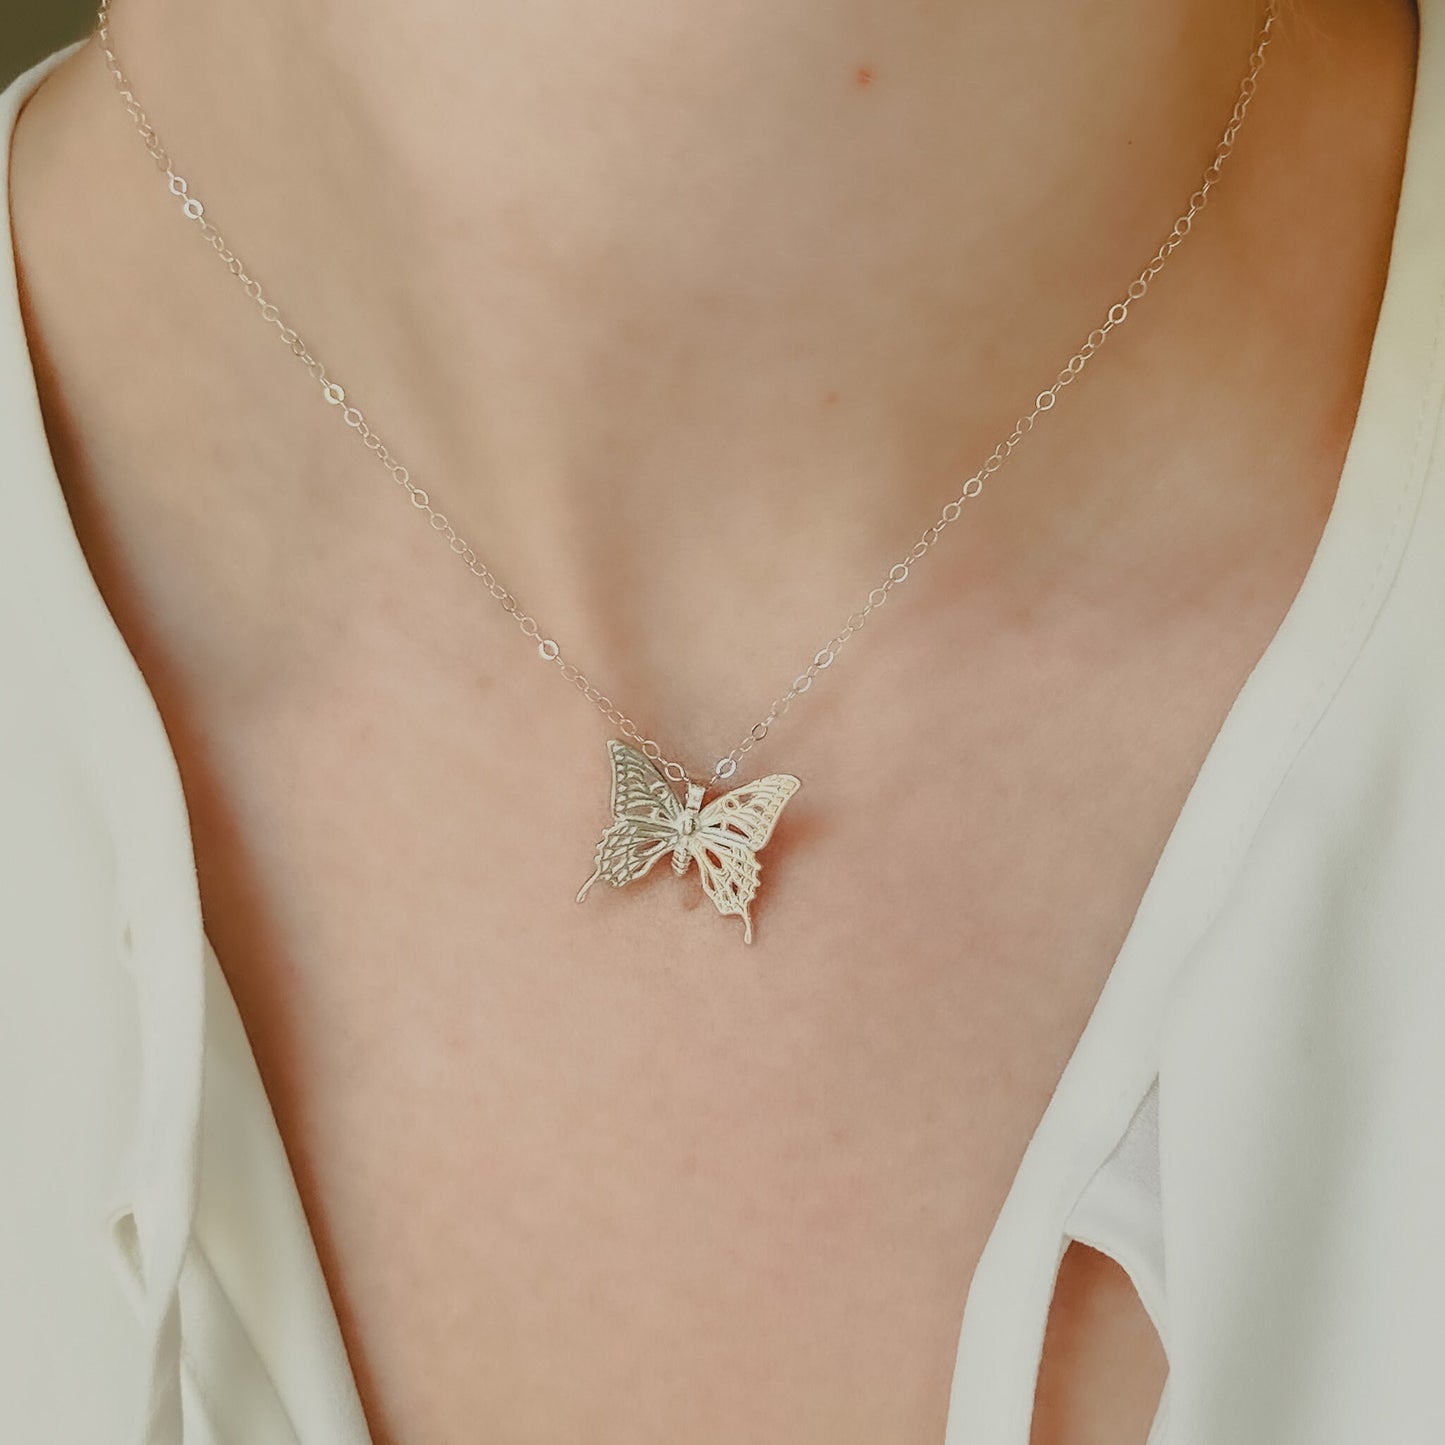 Swallowtail Butterfly Necklace